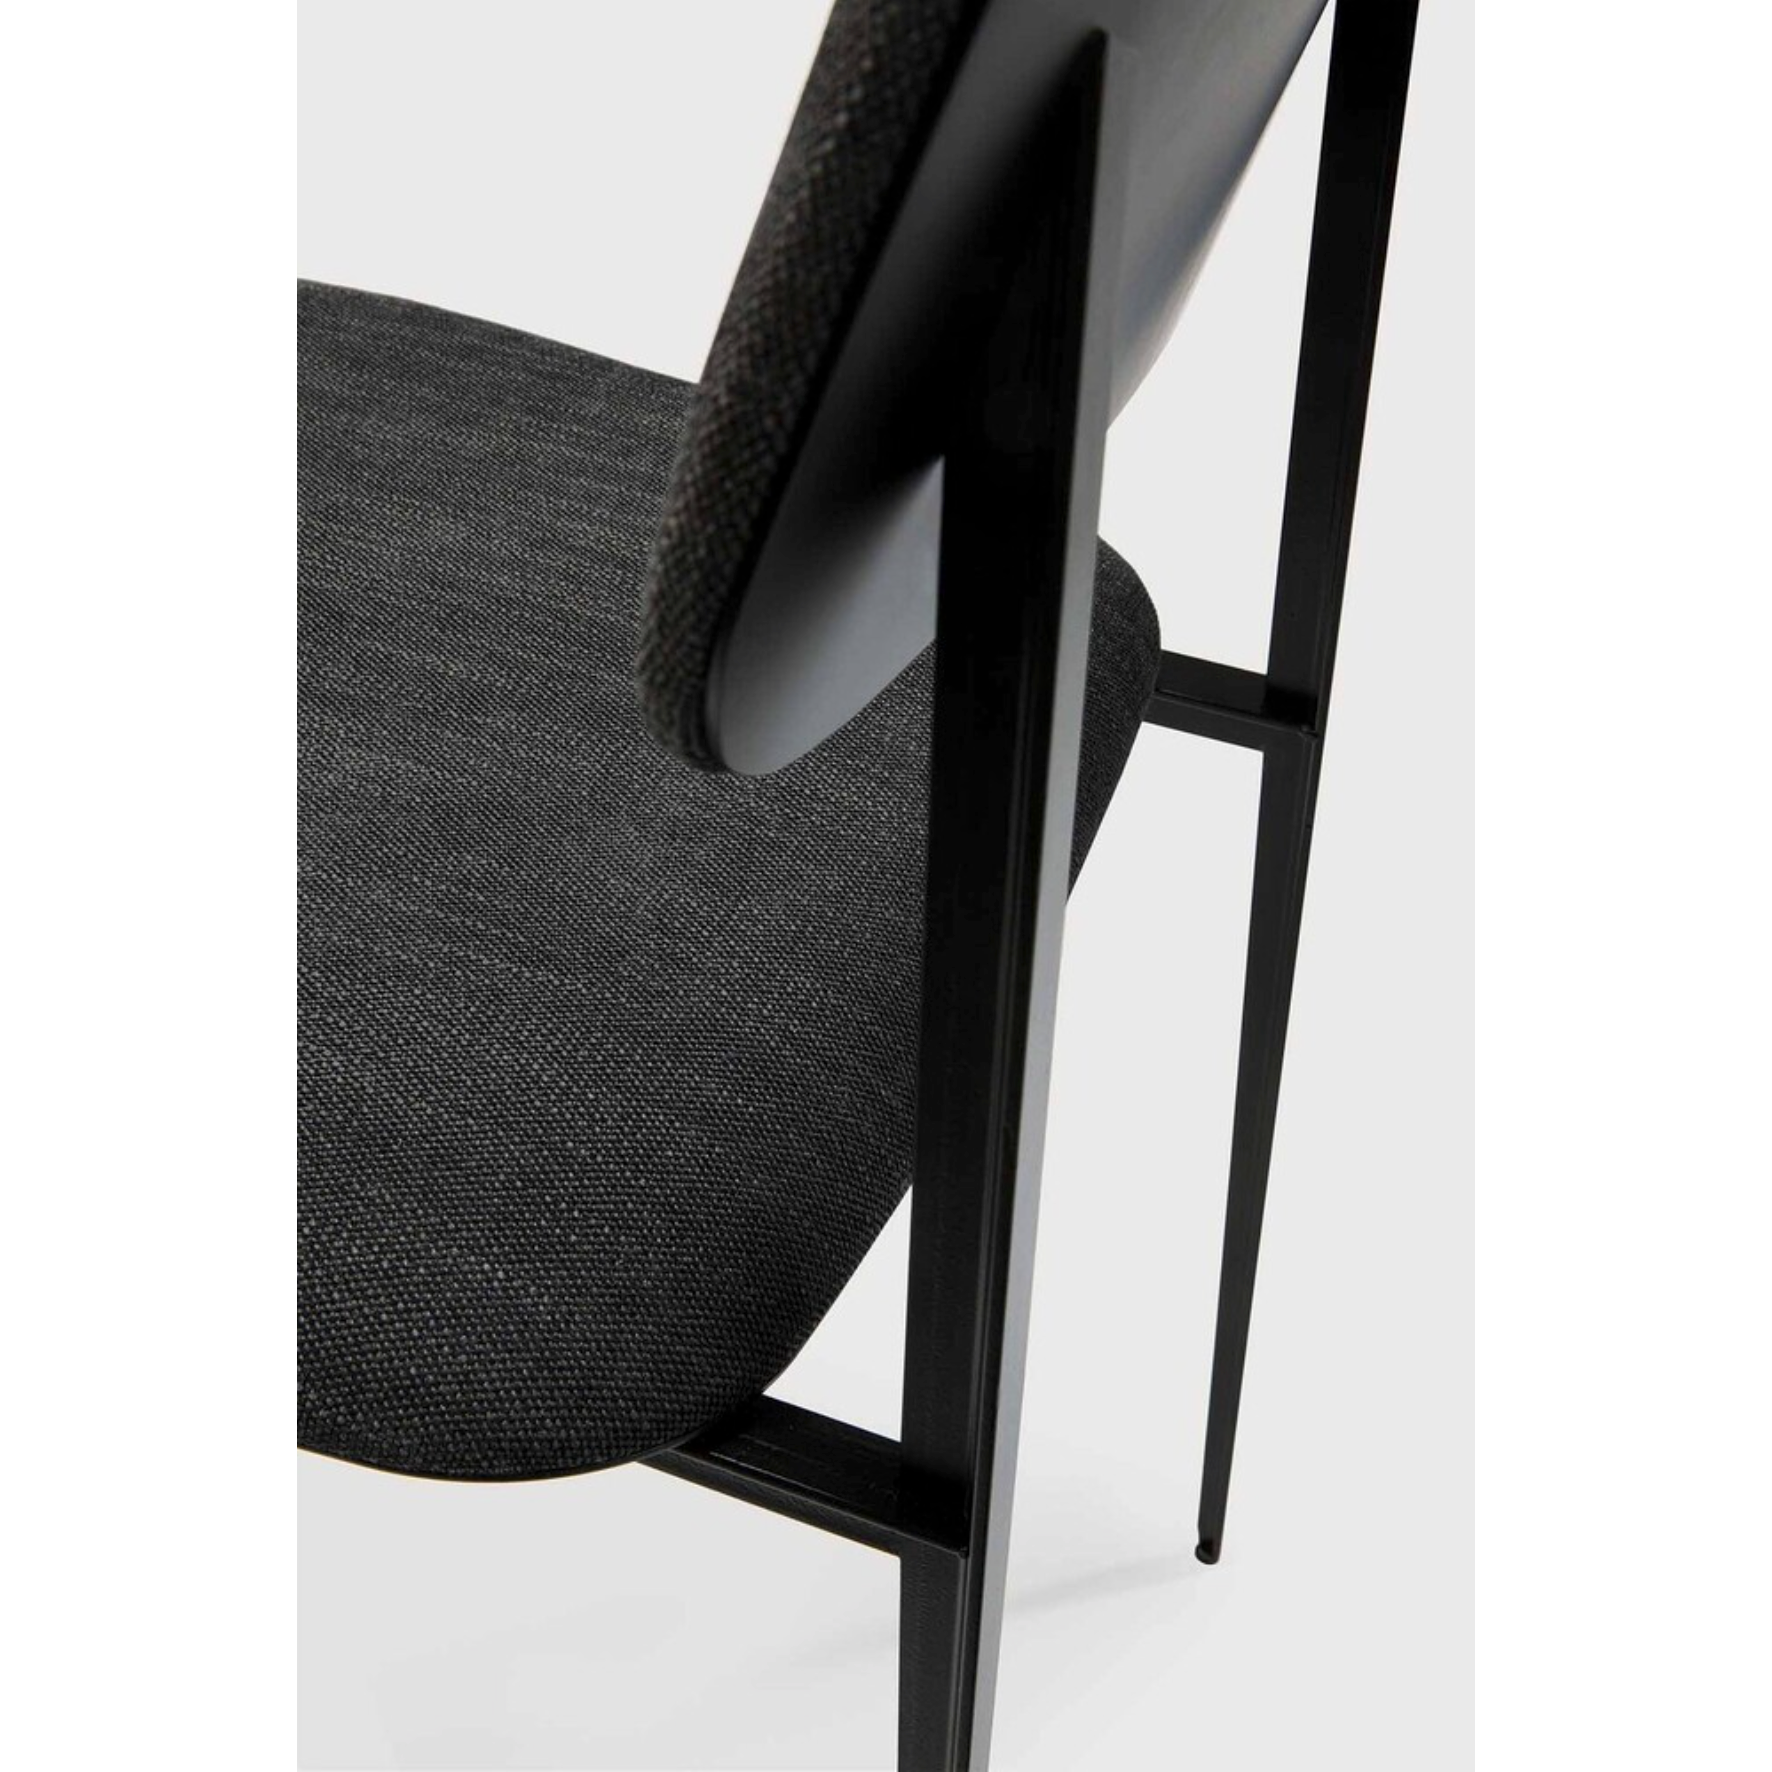 This DC Dining Chair is beautiful, minimalistic metal silhouette that would add an air of elegance to your dining table or kitchen. We love the details of the angled metal and the simplicity of this stunning chair.  Dimensions: 17"w x 19"d x 32.5"h  Weight: 19 lbs  Seat Height: 20"  Material: Metal Finish: Dark Grey Upholstery